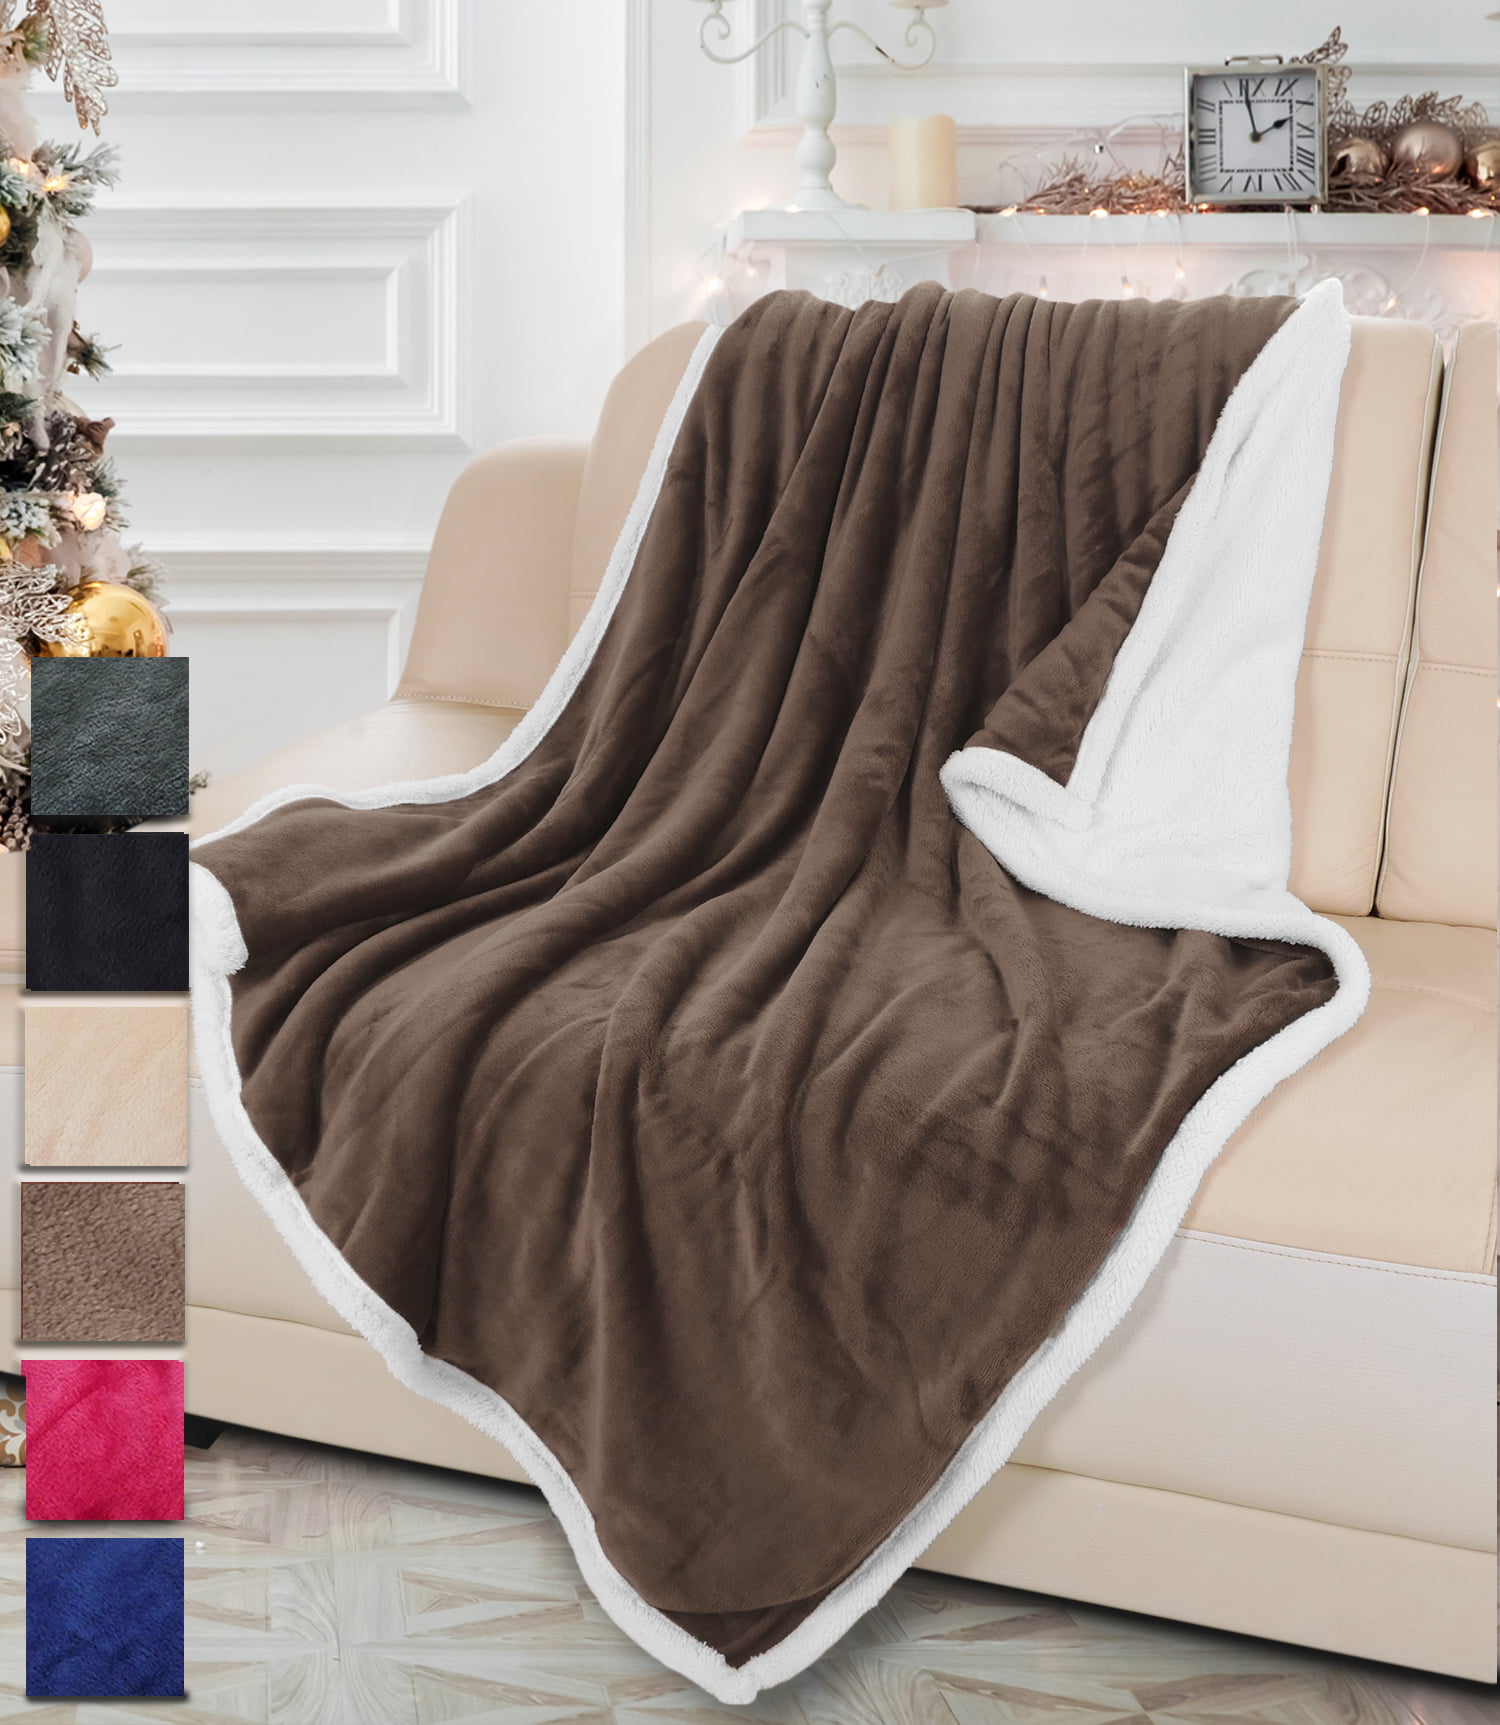 Farmhouse Home with Chic Windmill Sherpa Flannel Throw Blankets Thick Reversible Plush Fleece Blanket for Bed Couch Sofa Decor Black White Ultra Soft Comfy Warm Fuzzy TV Blanket 60x80Inch